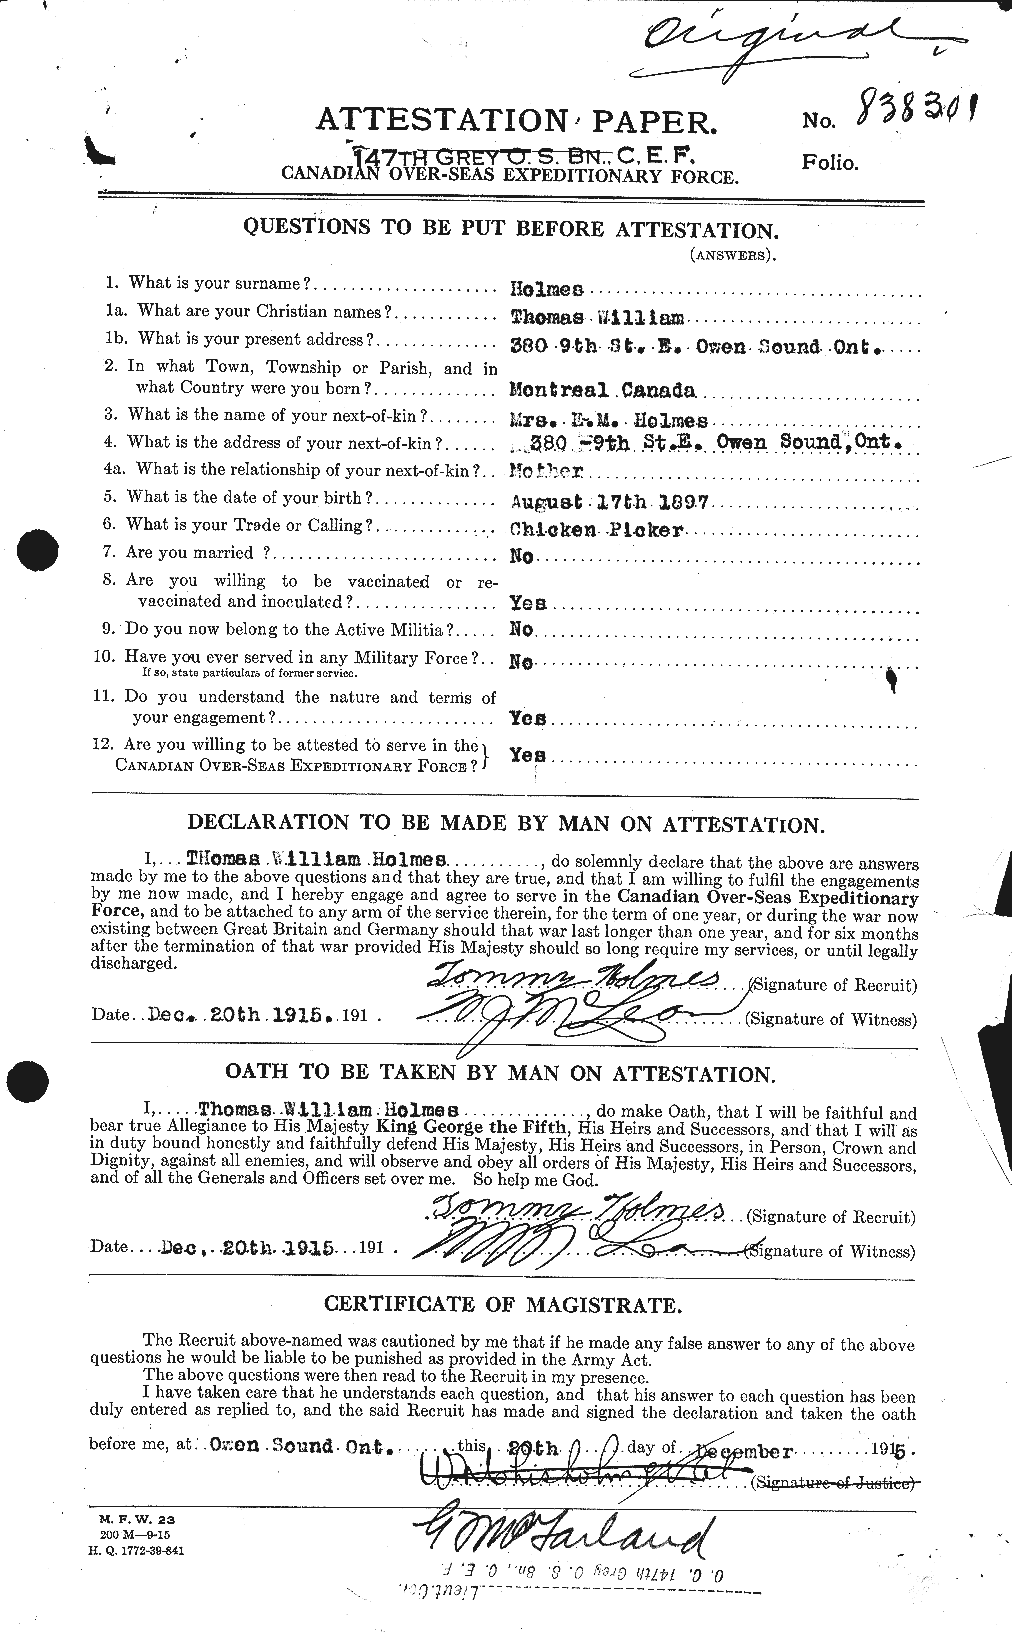 Personnel Records of the First World War - CEF 395715a